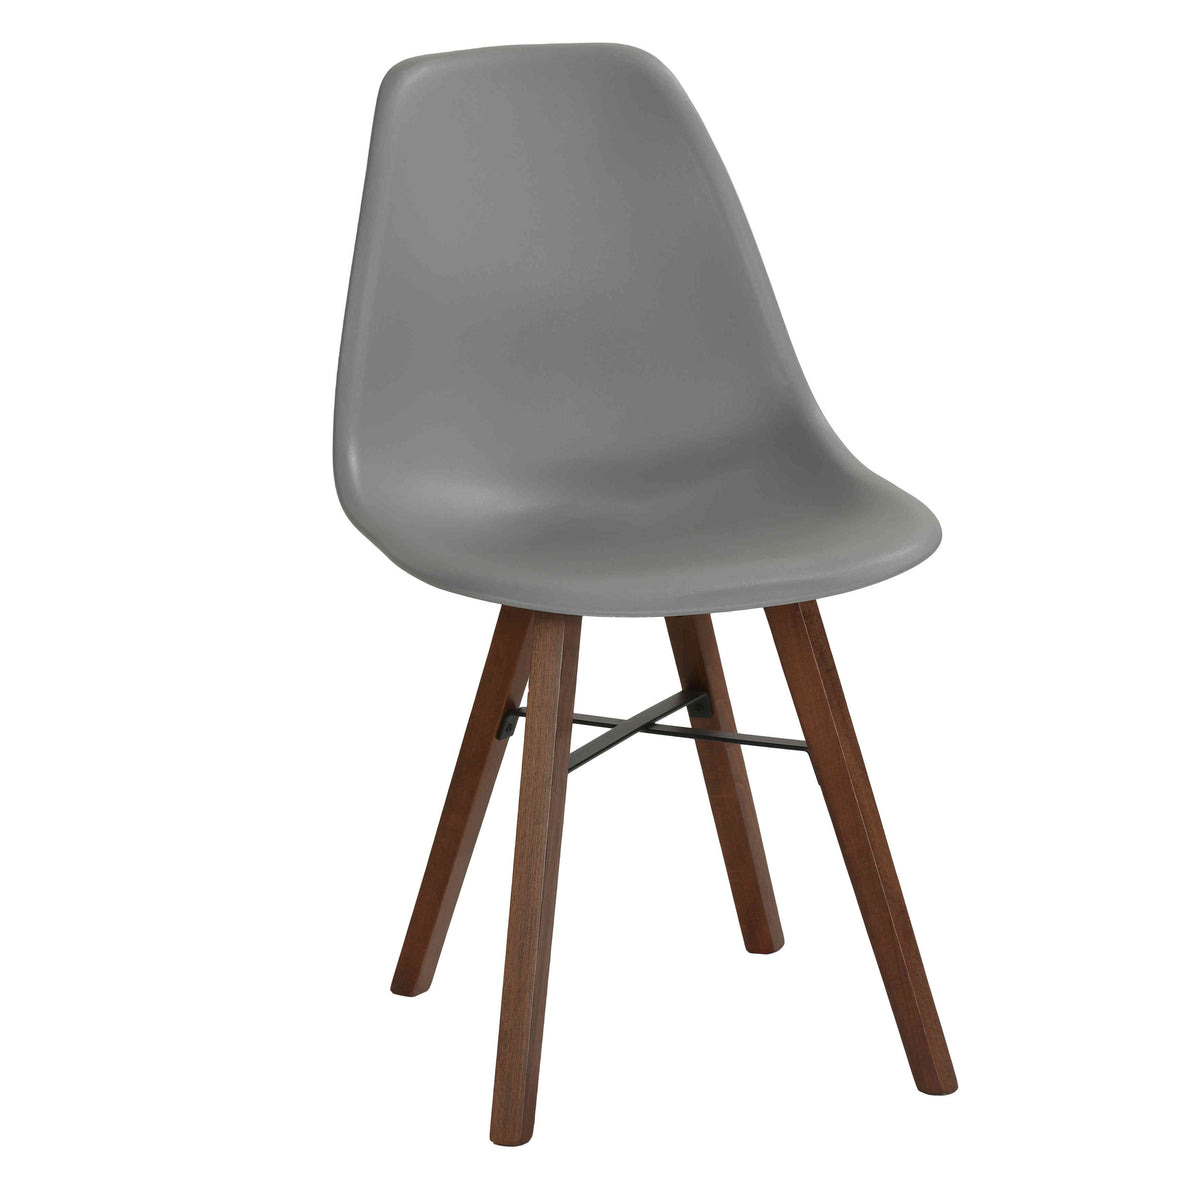 Cortesi Home Xena Dining Chair in Grey Plastic with Cushion, Walnut Finish Legs (Set of 4)